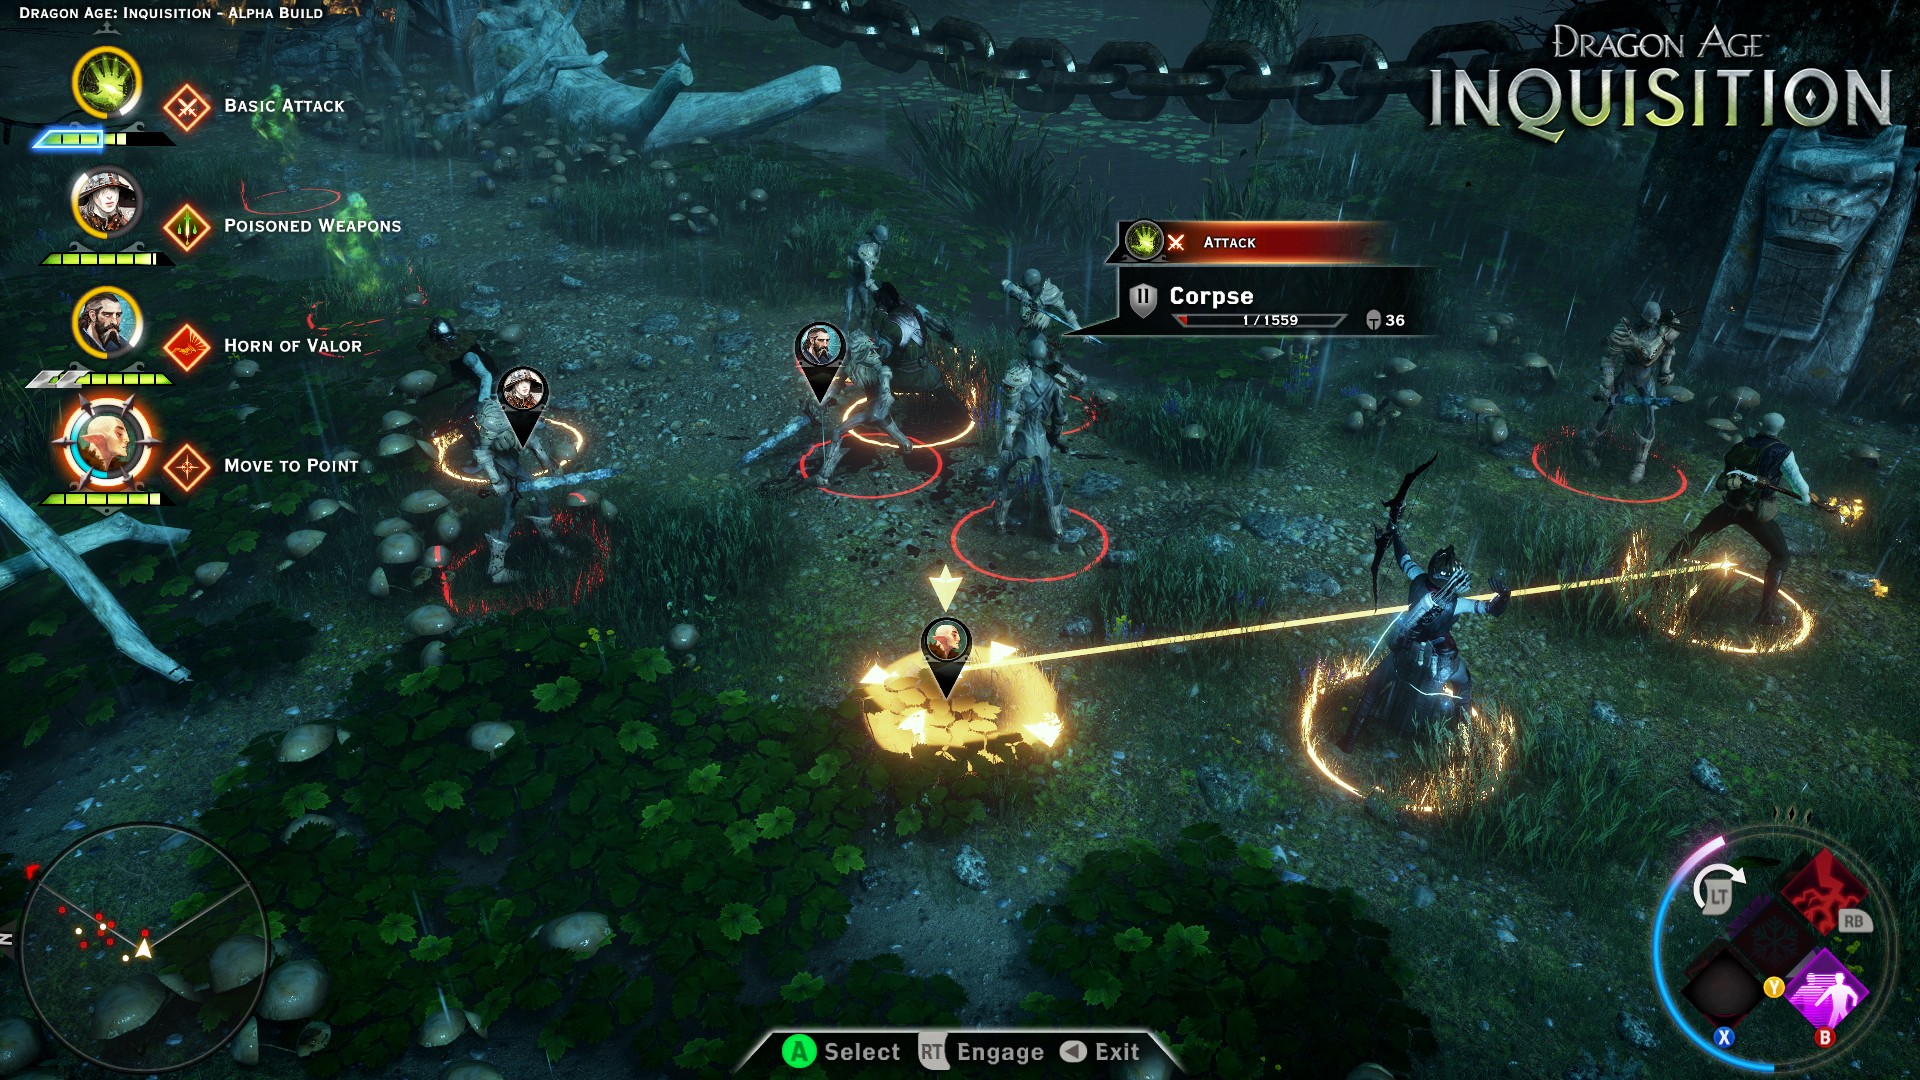 Dragon-Age-Inquisition-Video-Reveals-Elder-One-Antagonists-New-Enemy-Types-454803-3